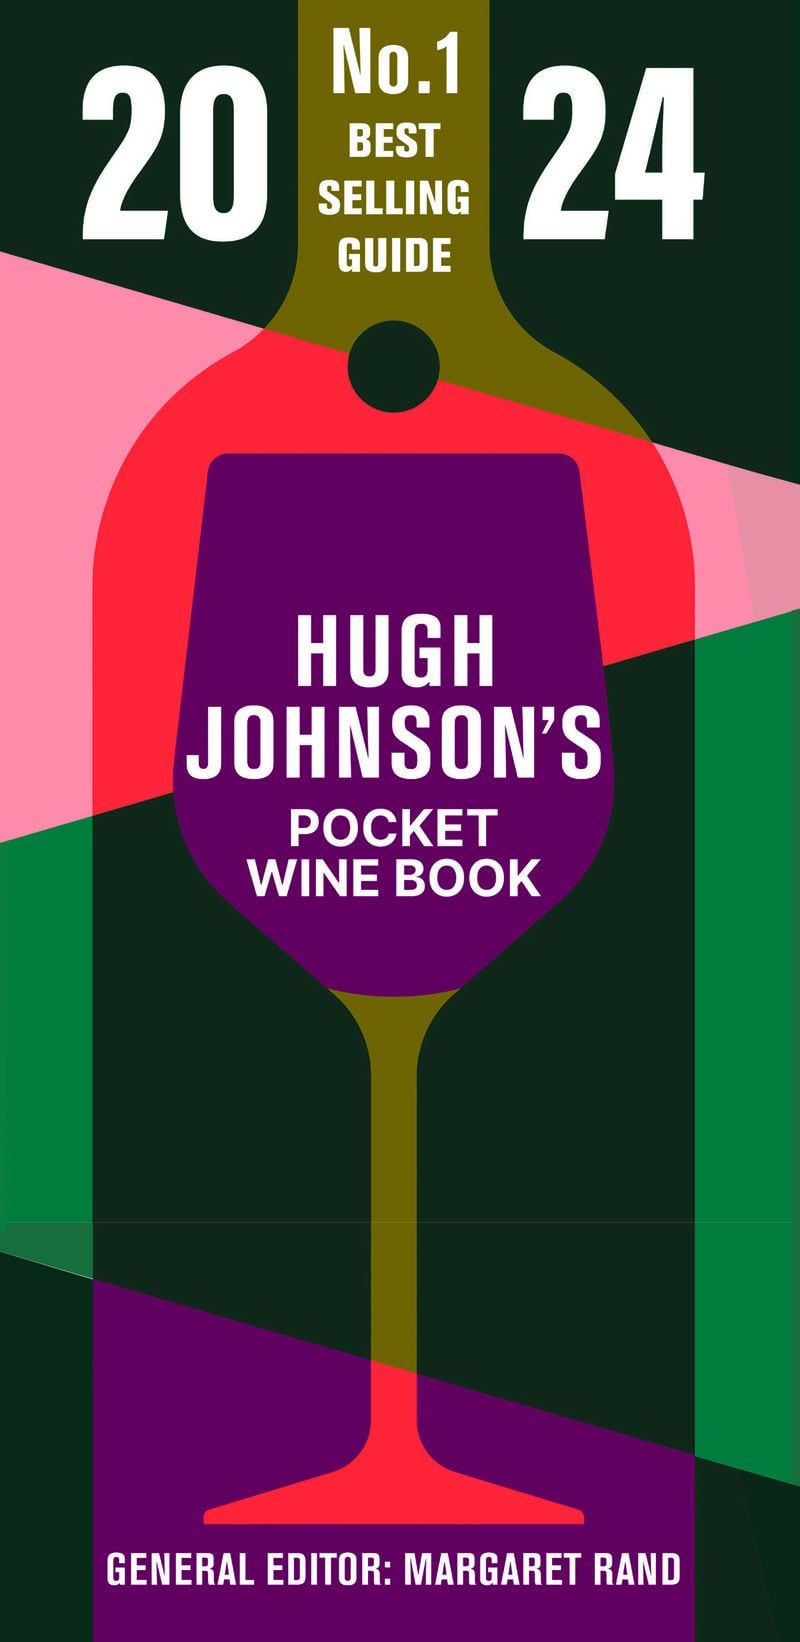 Since 1977 Hugh Johnson's pocket sized wine book has been an essential reference, each year with a special section. This year's has an in depth look at Chardonnay.
(Courtesy of Octopus Books)